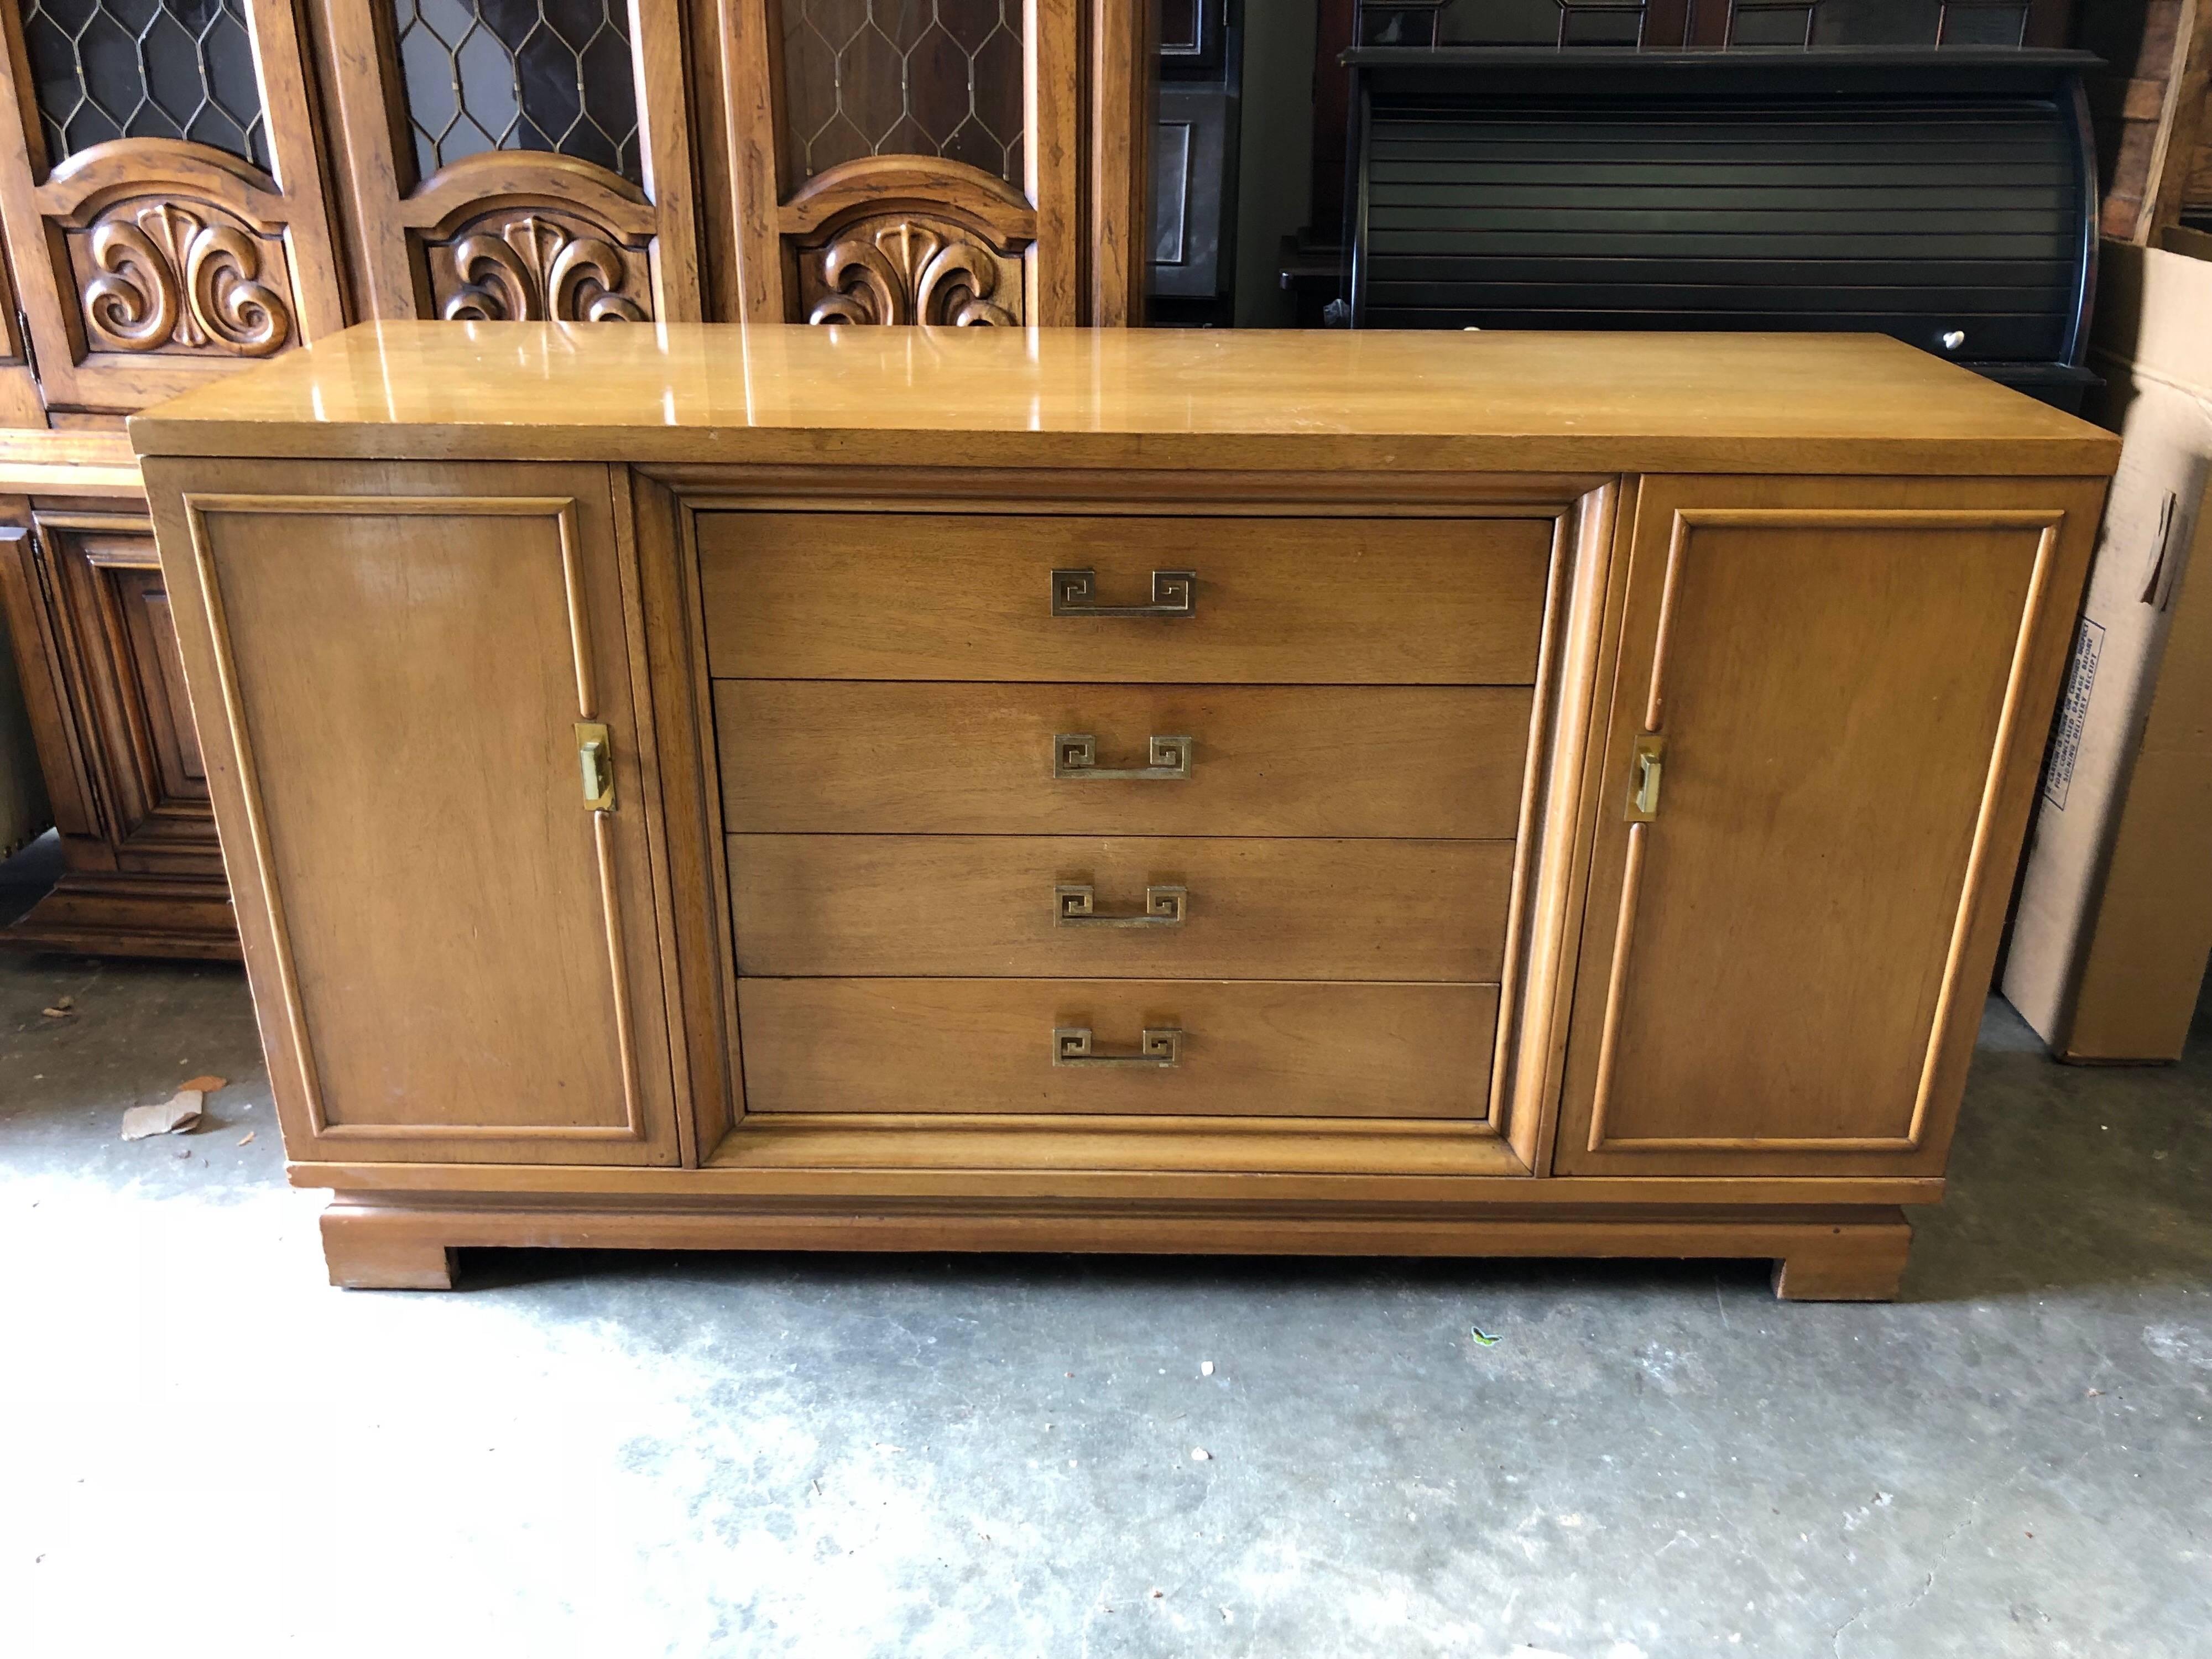 Mid Century Bernhardt credenza or dresser with Greek key handles. Sleek and simple lines make up this beauty. This piece has four drawers and two cabinets doors with shelves allowing ample storage. Great in a bedroom, dining room or living room. Can